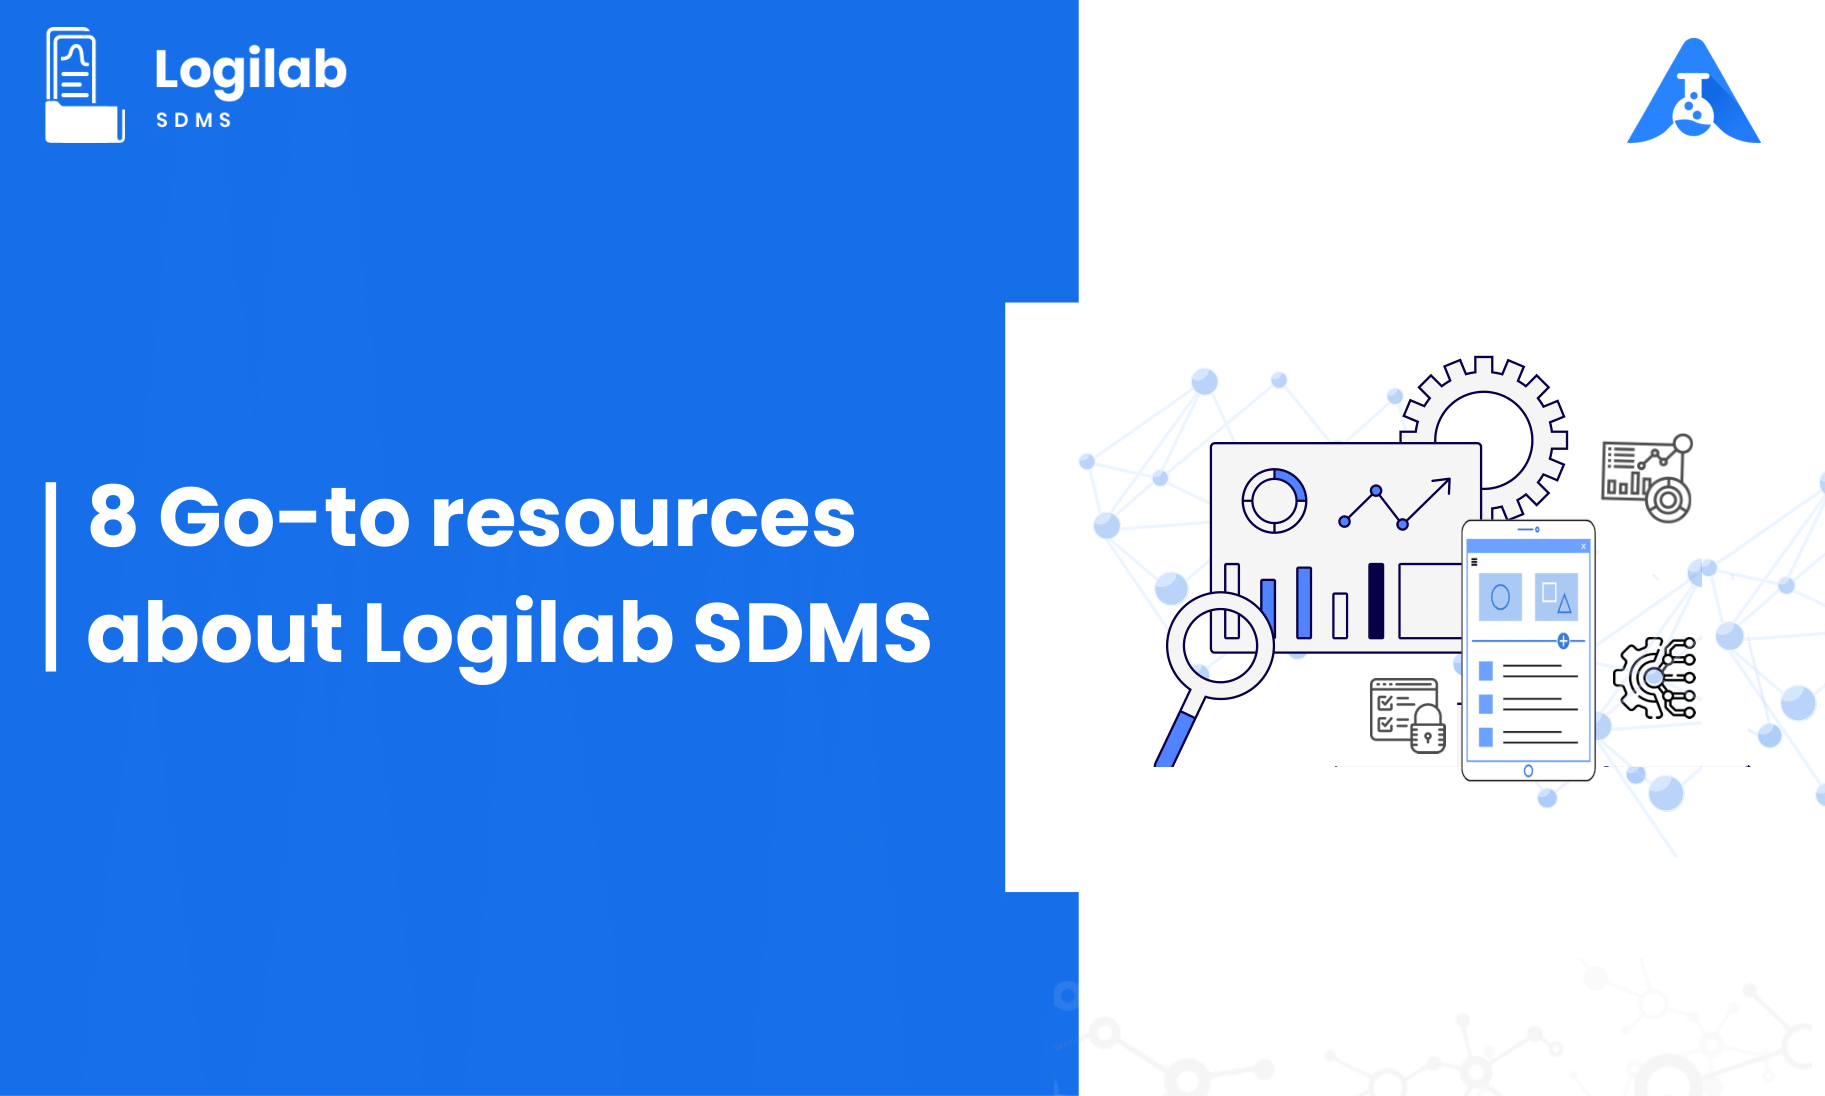 8 Go-to resources about Logilab SDMS